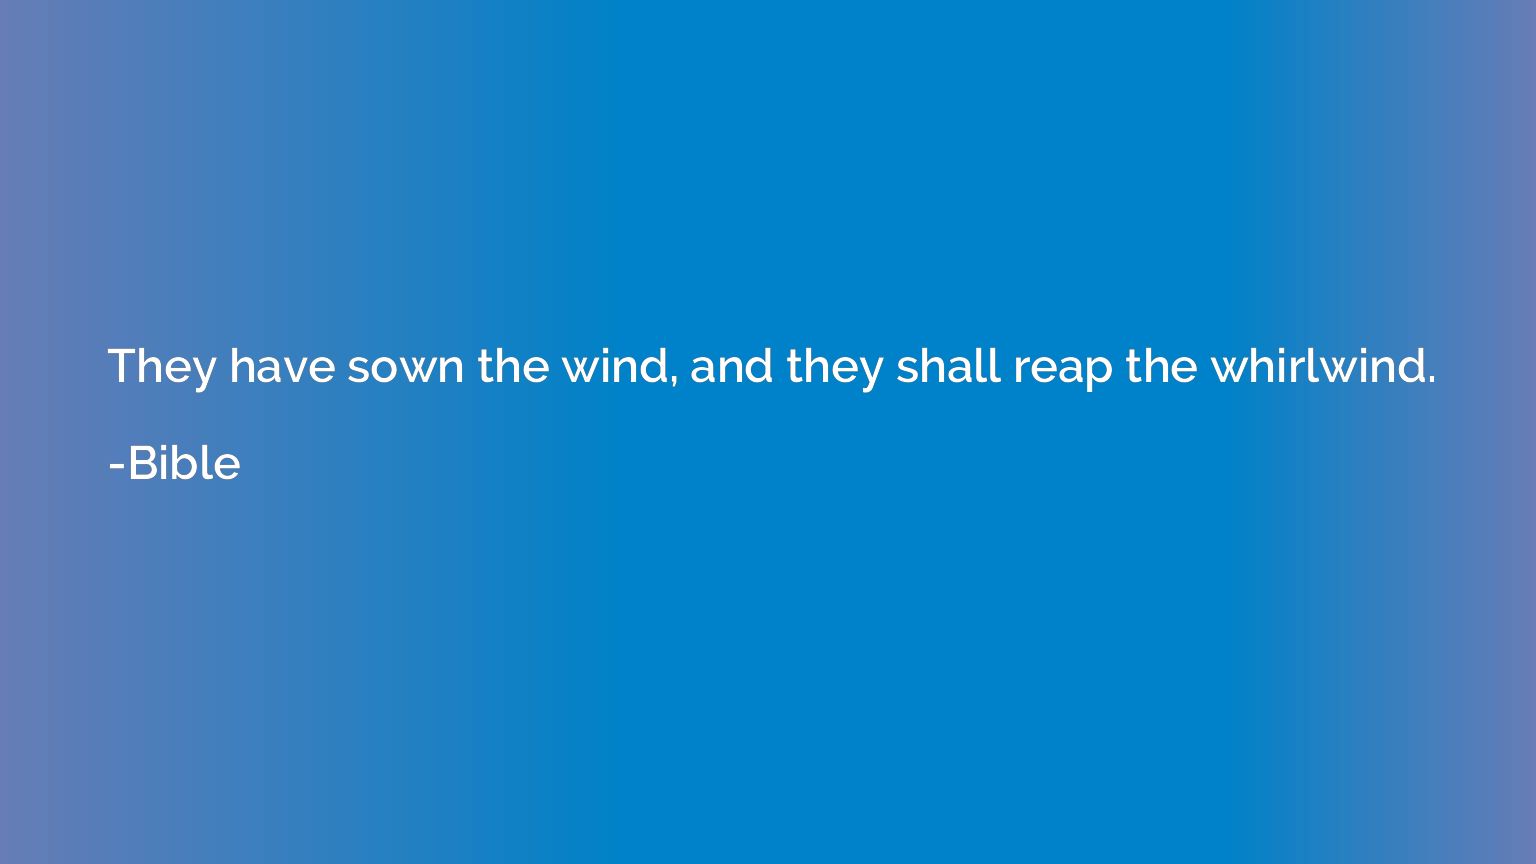 They have sown the wind, and they shall reap the whirlwind.